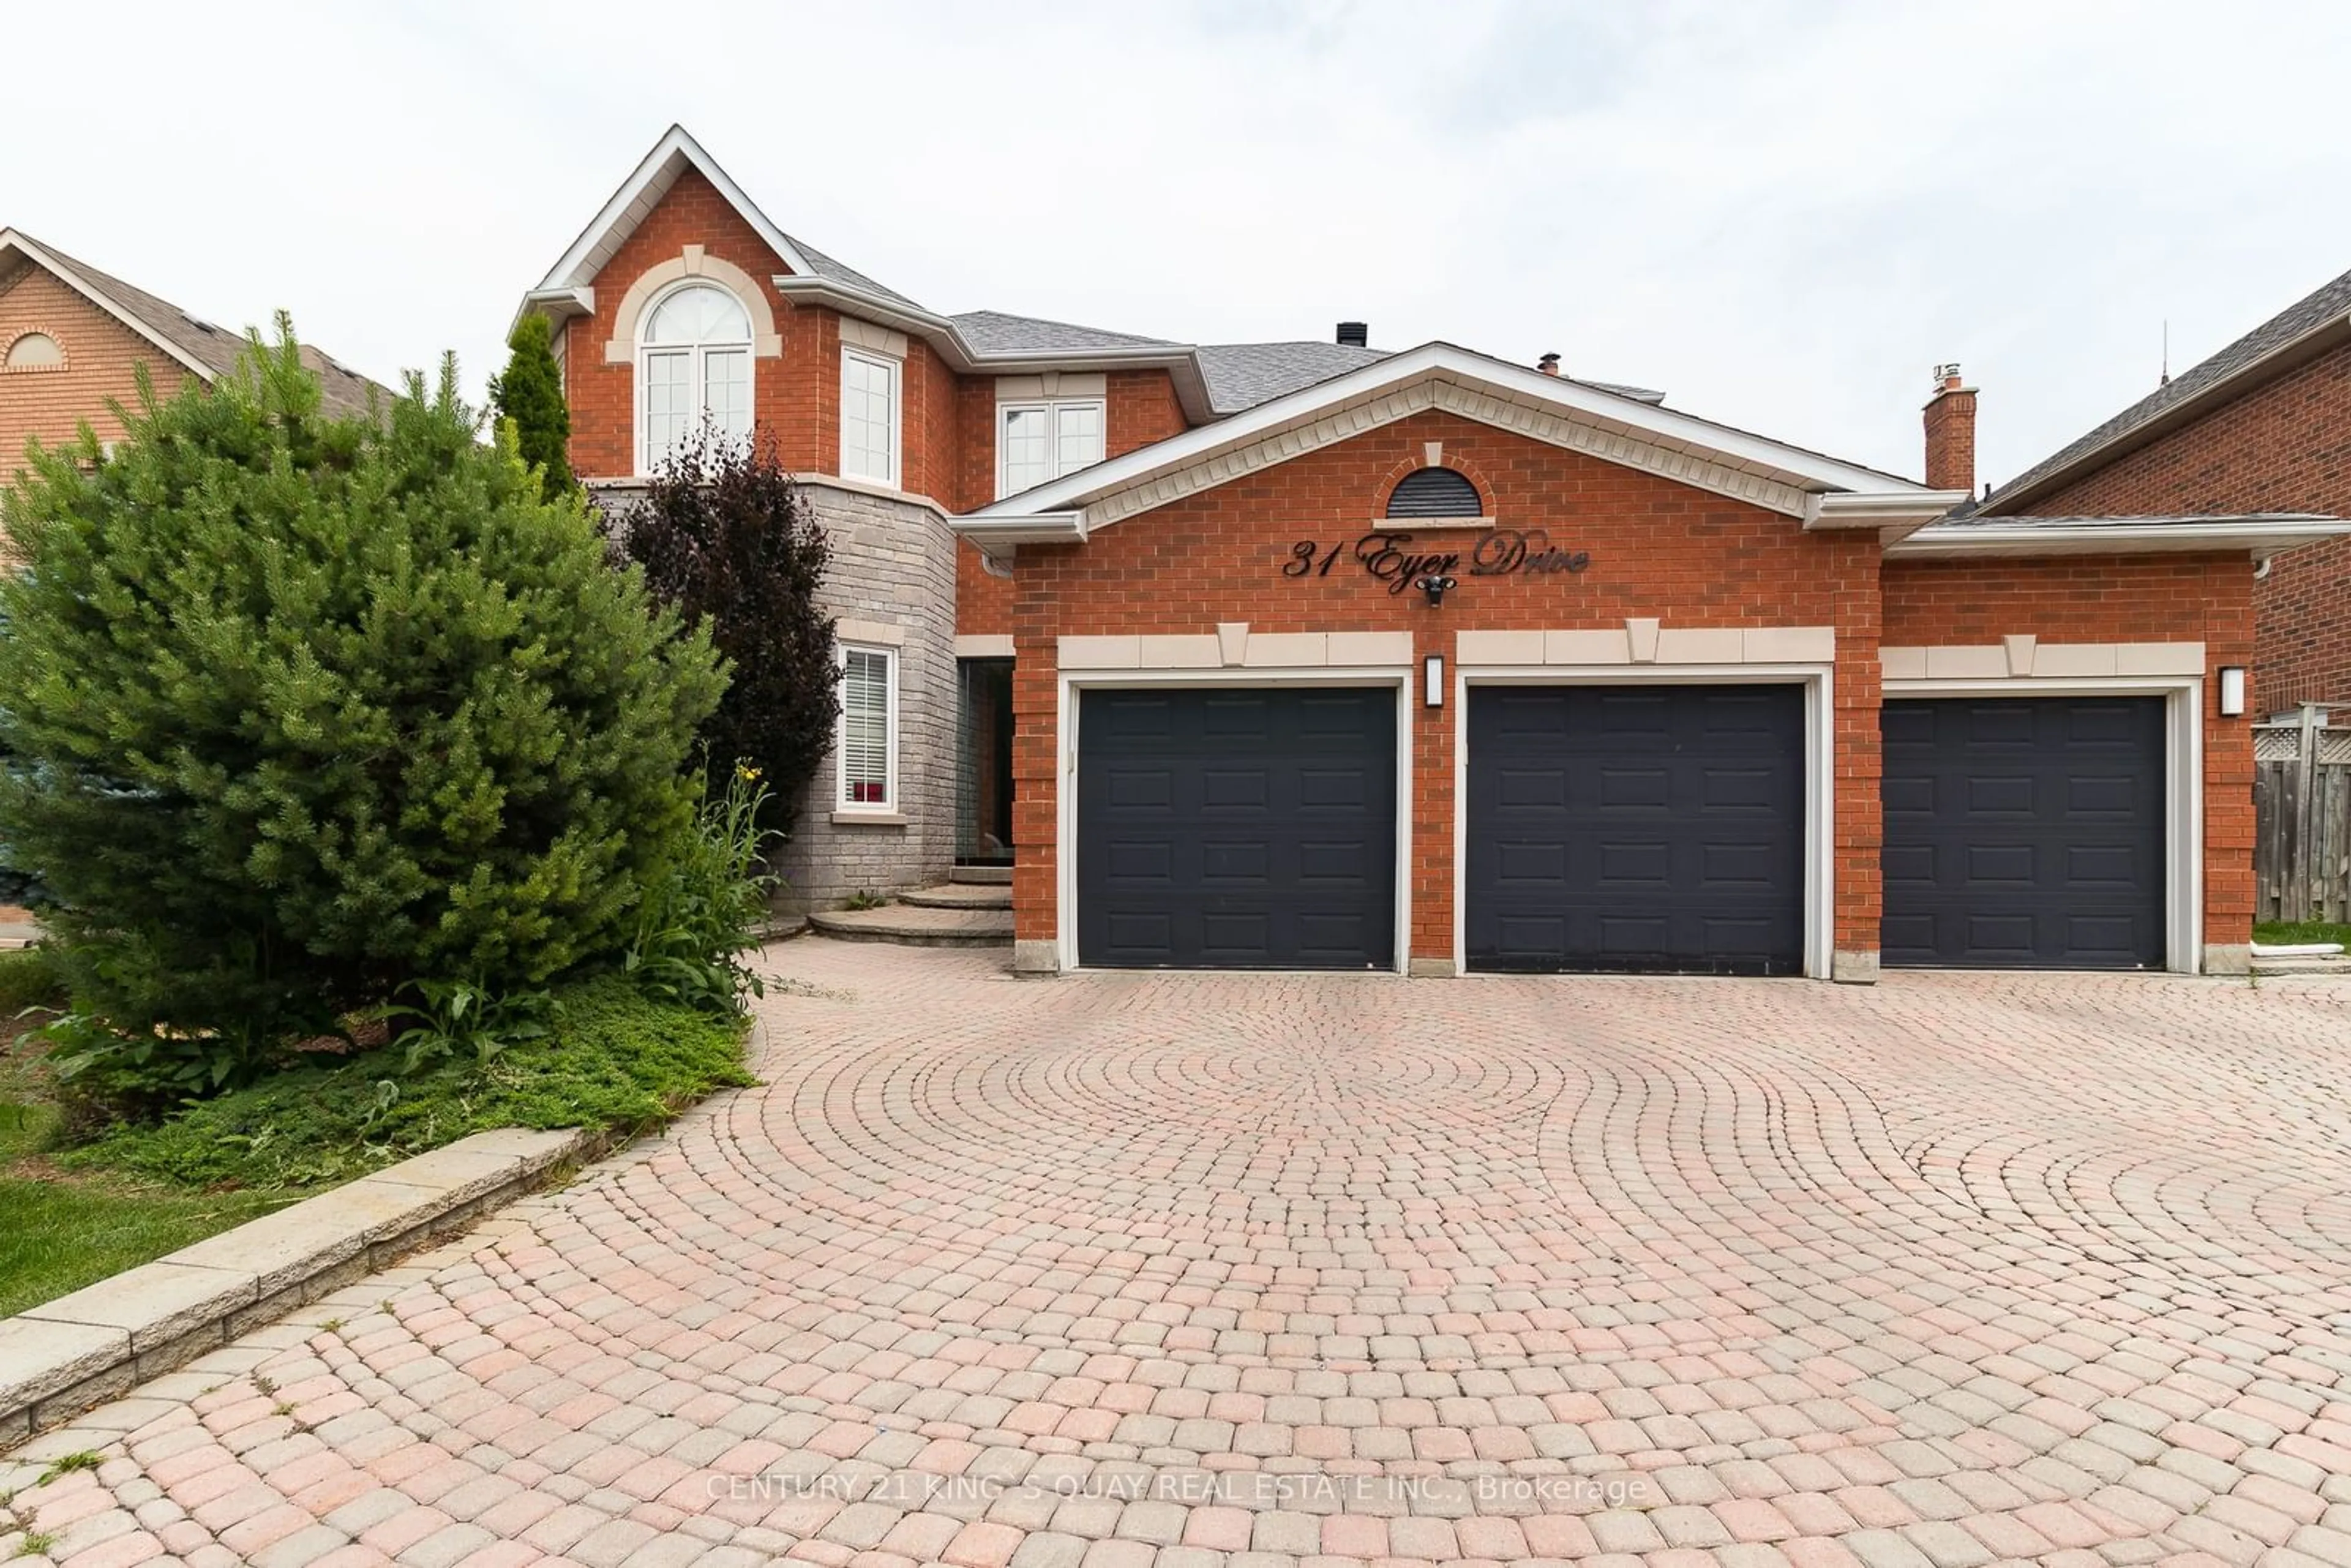 Home with brick exterior material for 31 Eyer Dr, Markham Ontario L6C 1T8